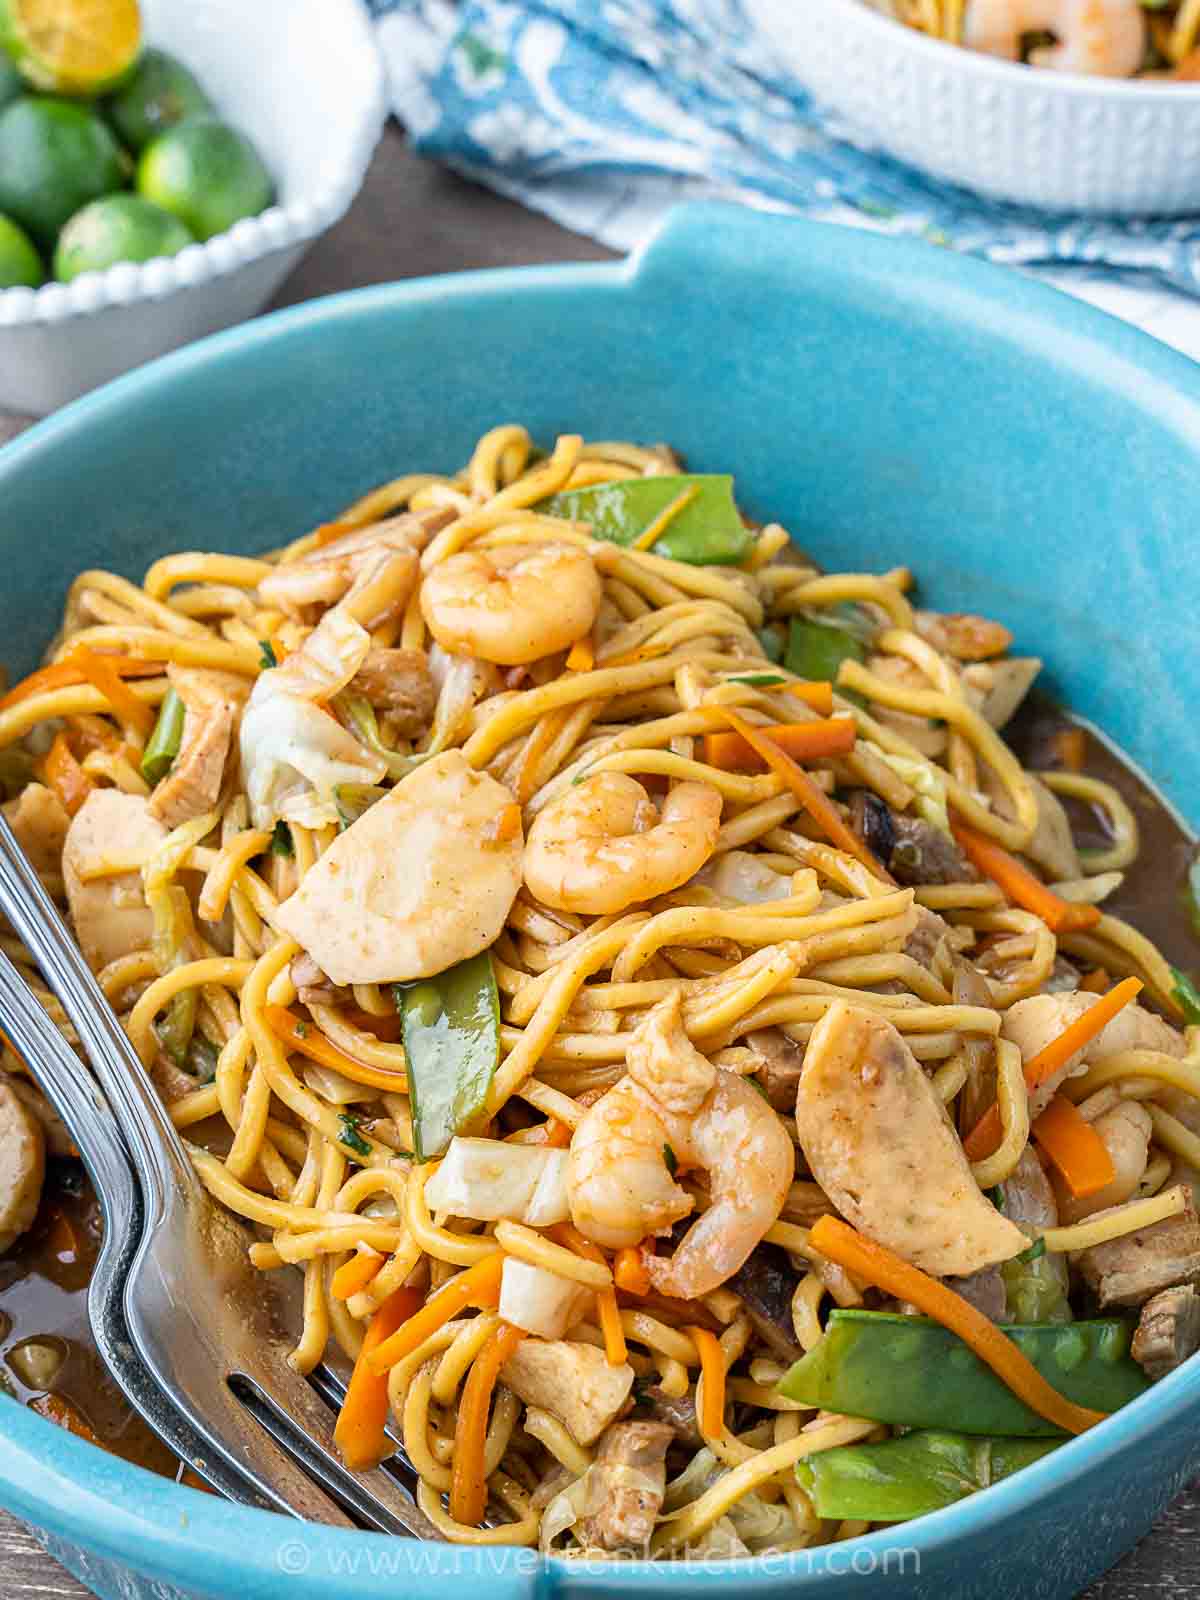 Stir-fried yellow noodles called pancit canton with shrimp, pork and vegetables.